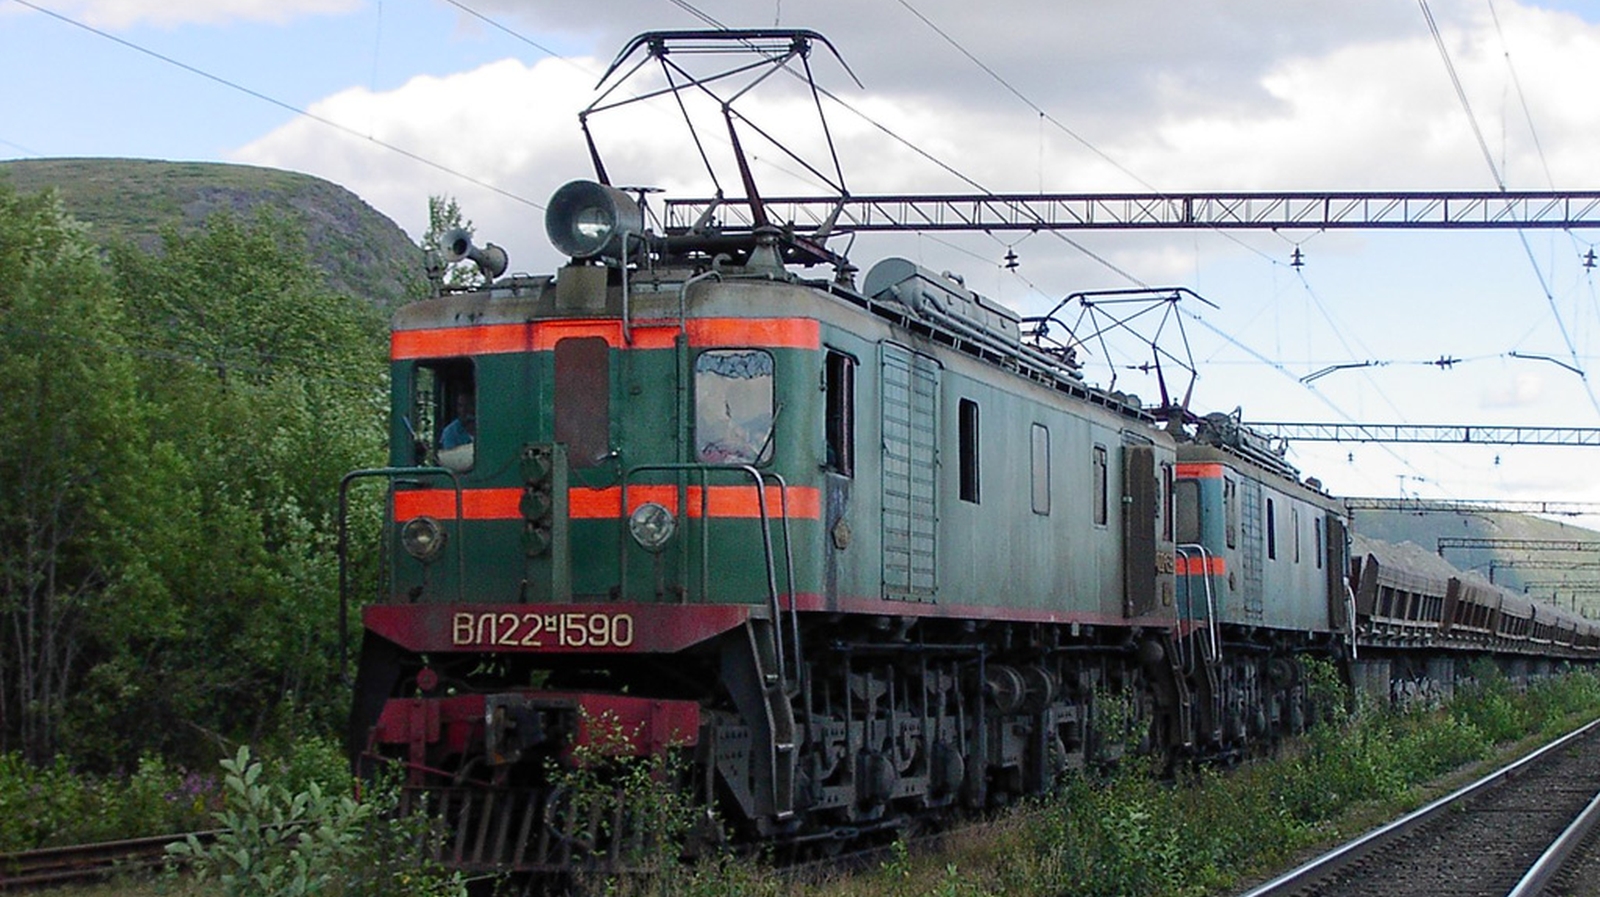 Two ВЛ22? in service in 2003 for mining apatite